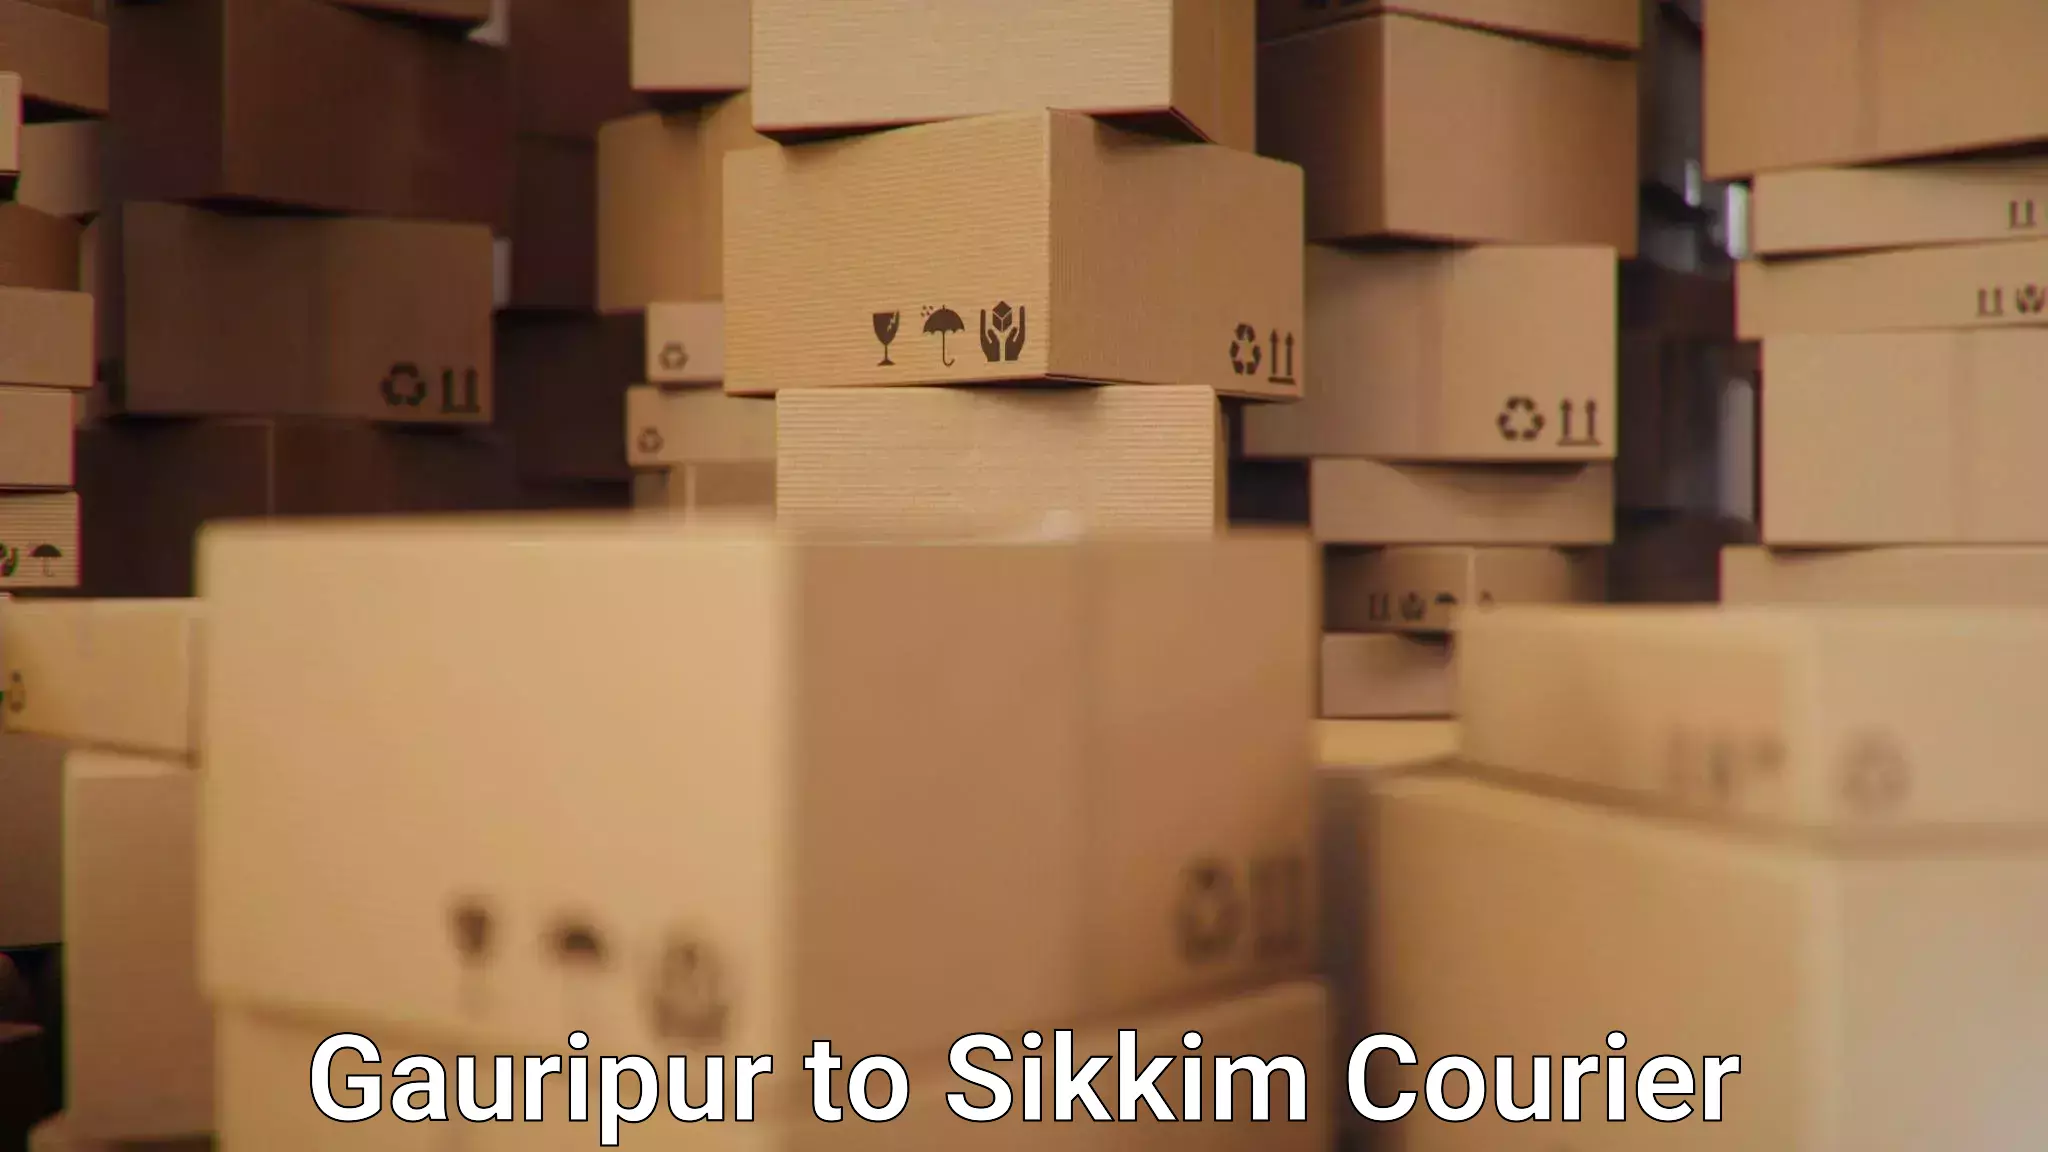 Courier service innovation Gauripur to North Sikkim